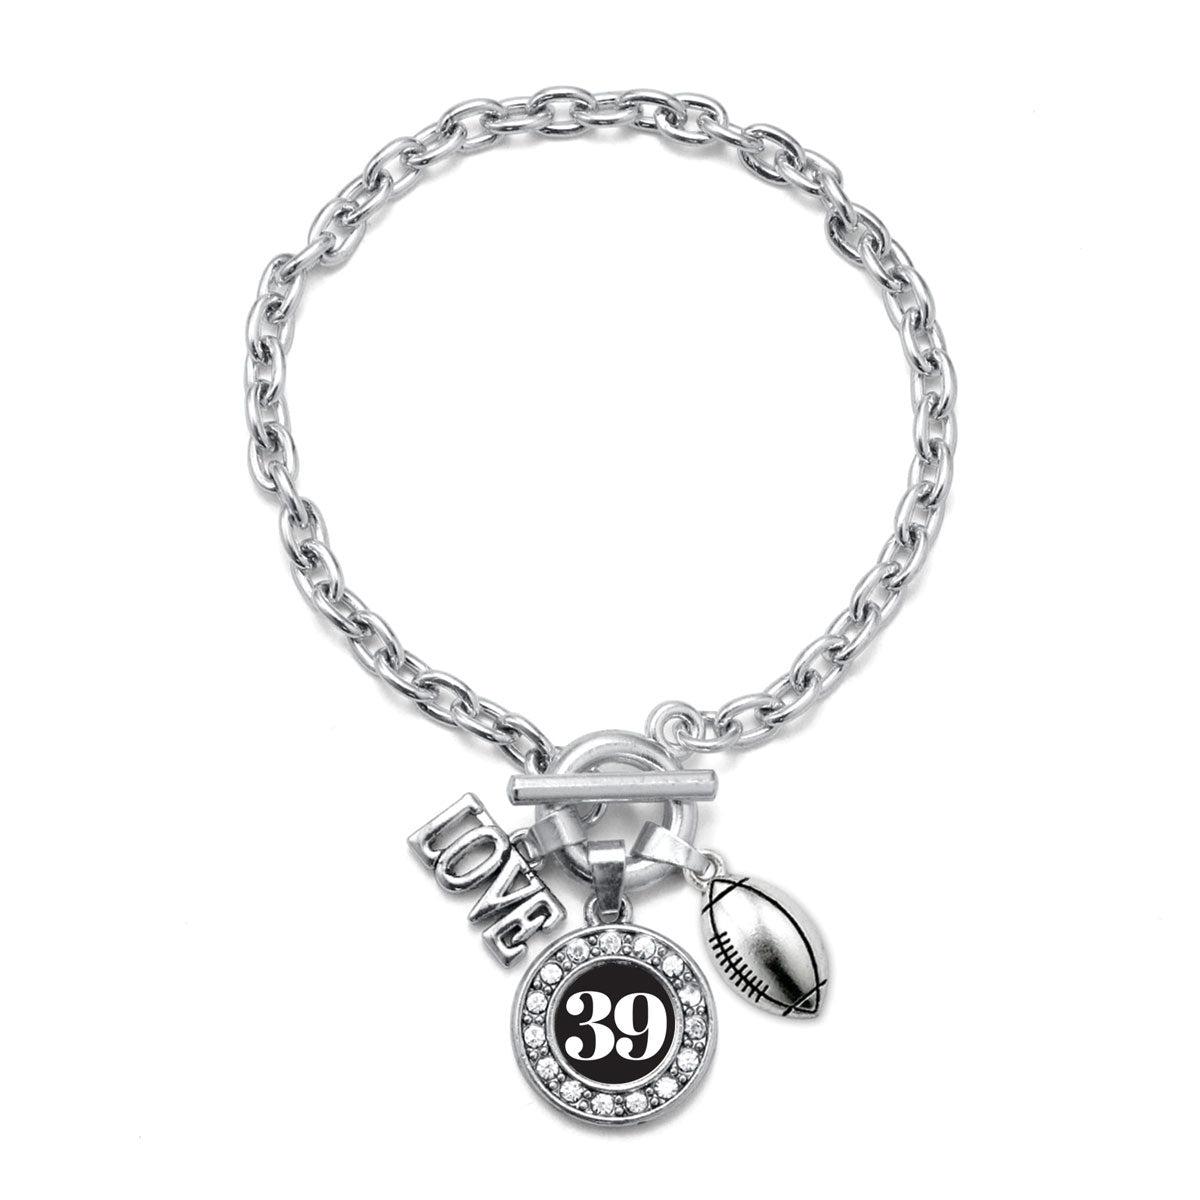 Silver Football - Sports Number 39 Circle Charm Toggle Bracelet